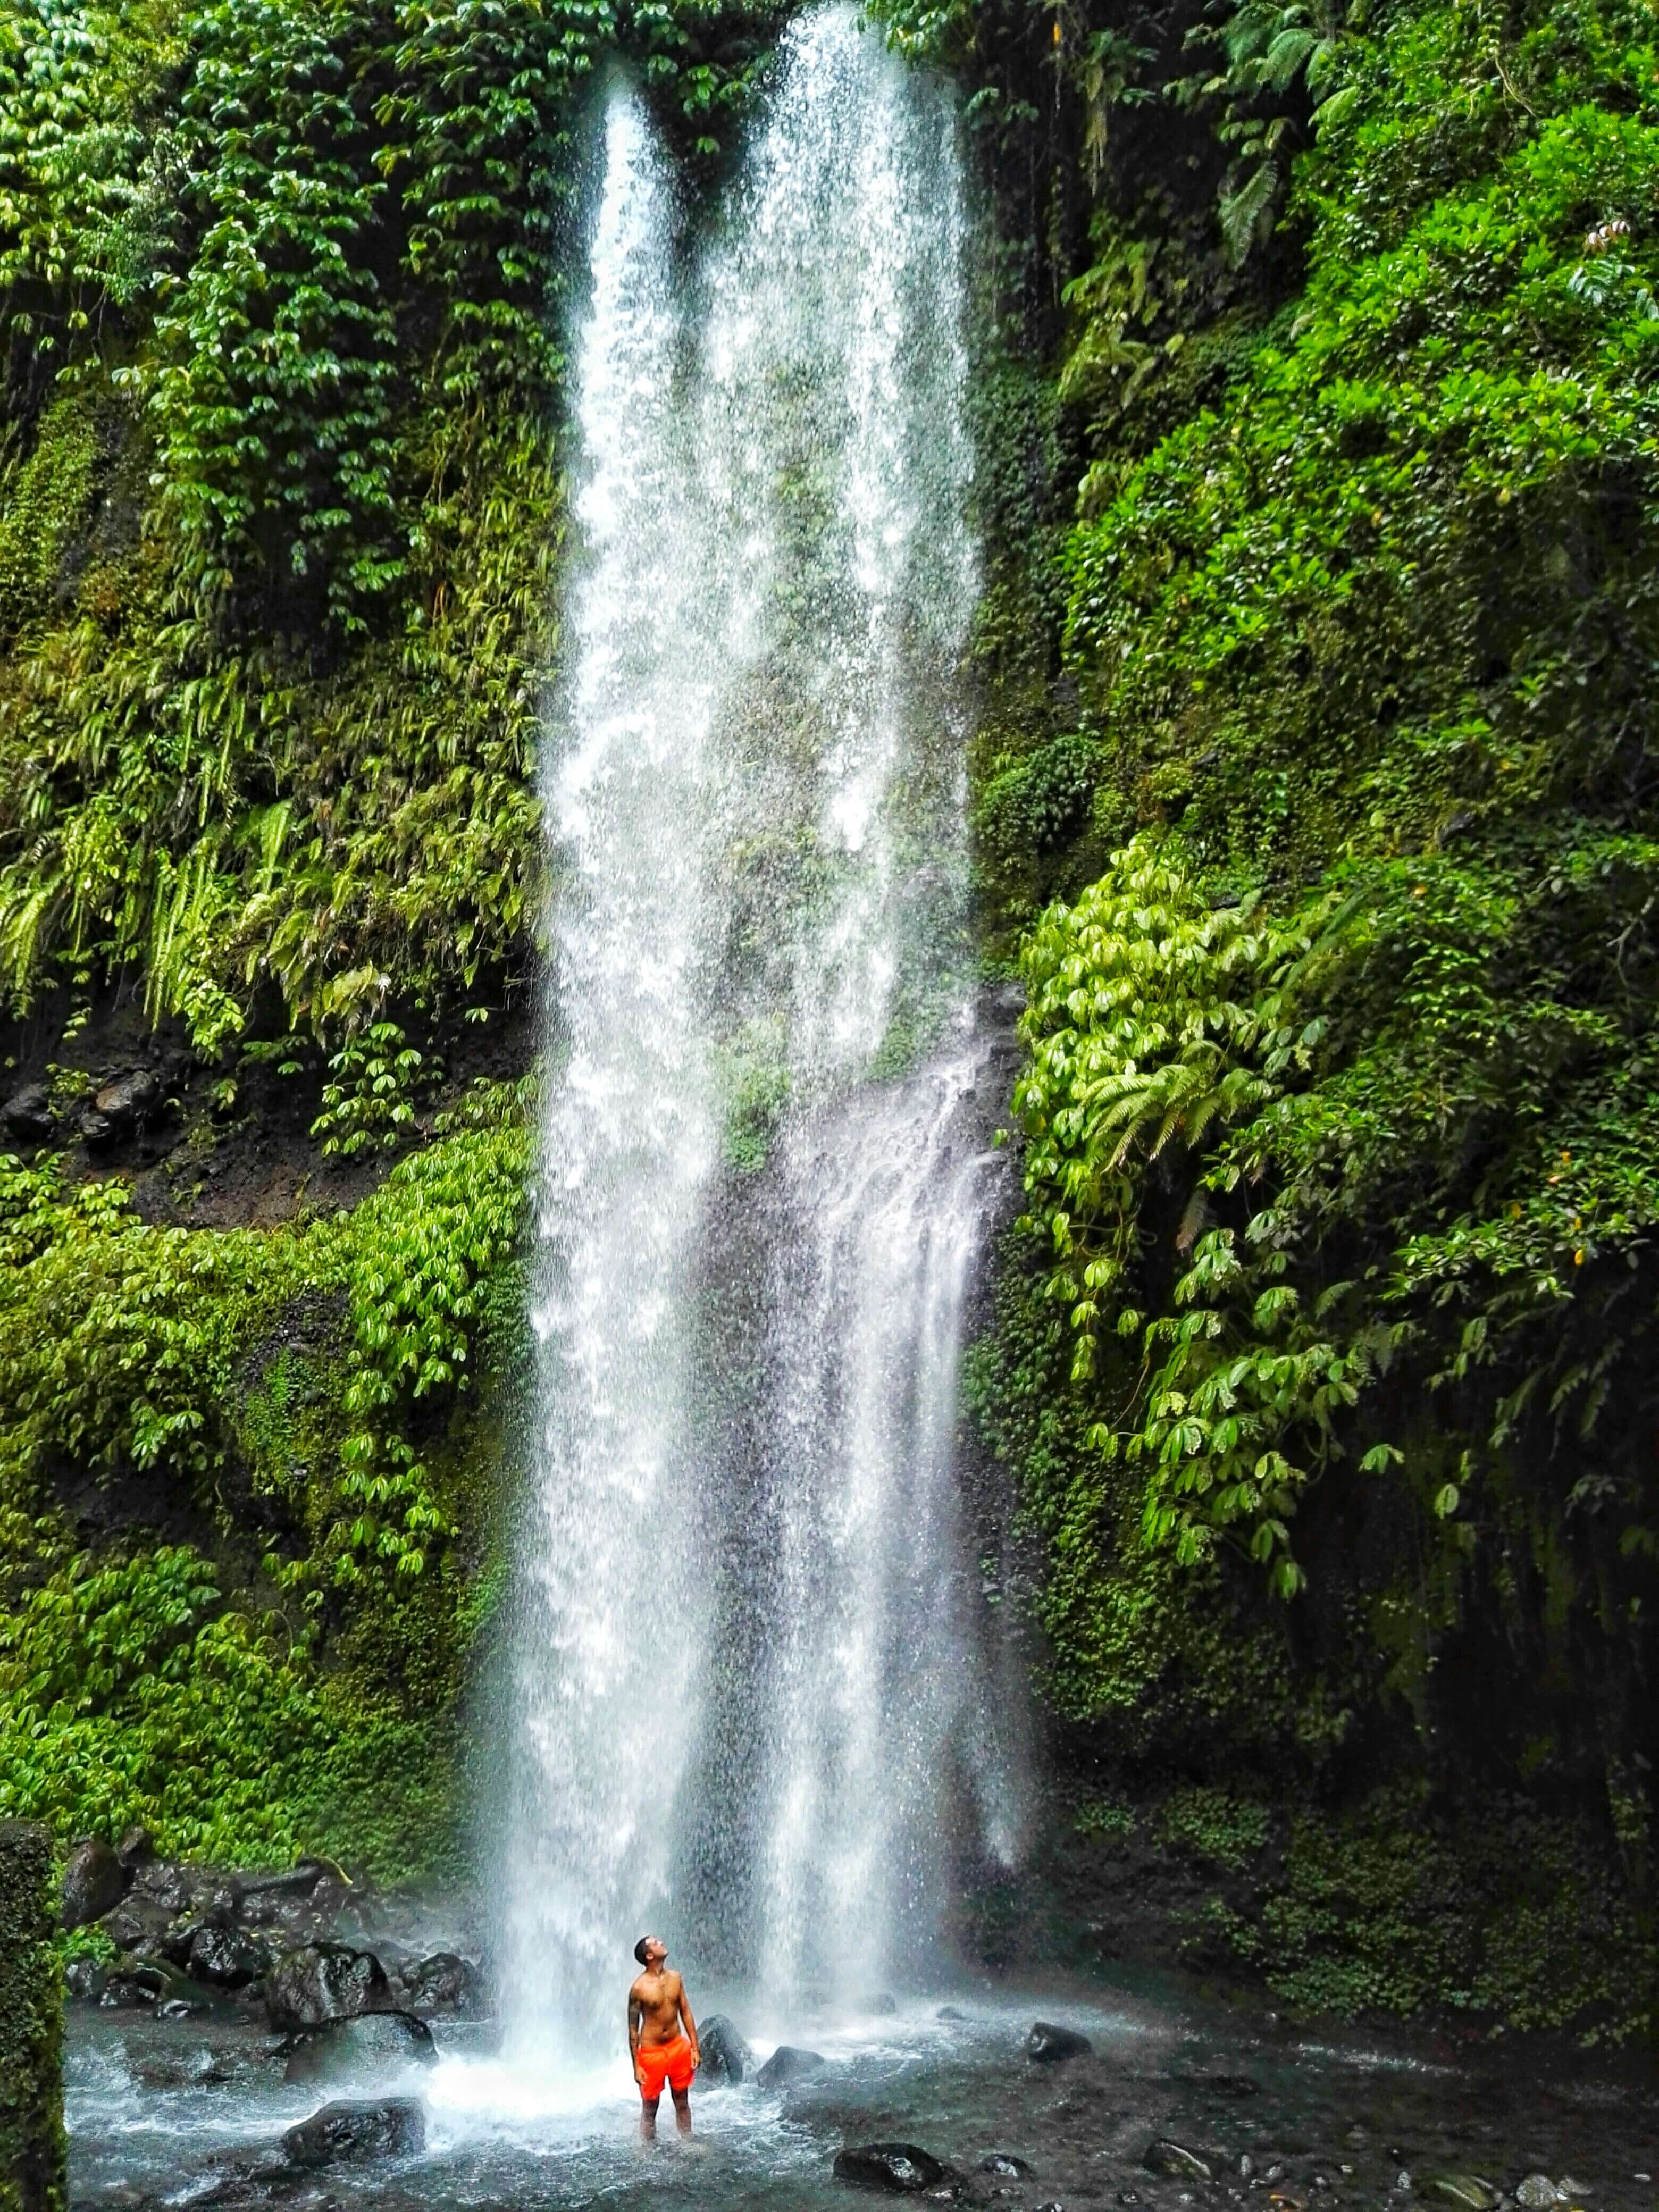 How to Find the Lombok waterfall